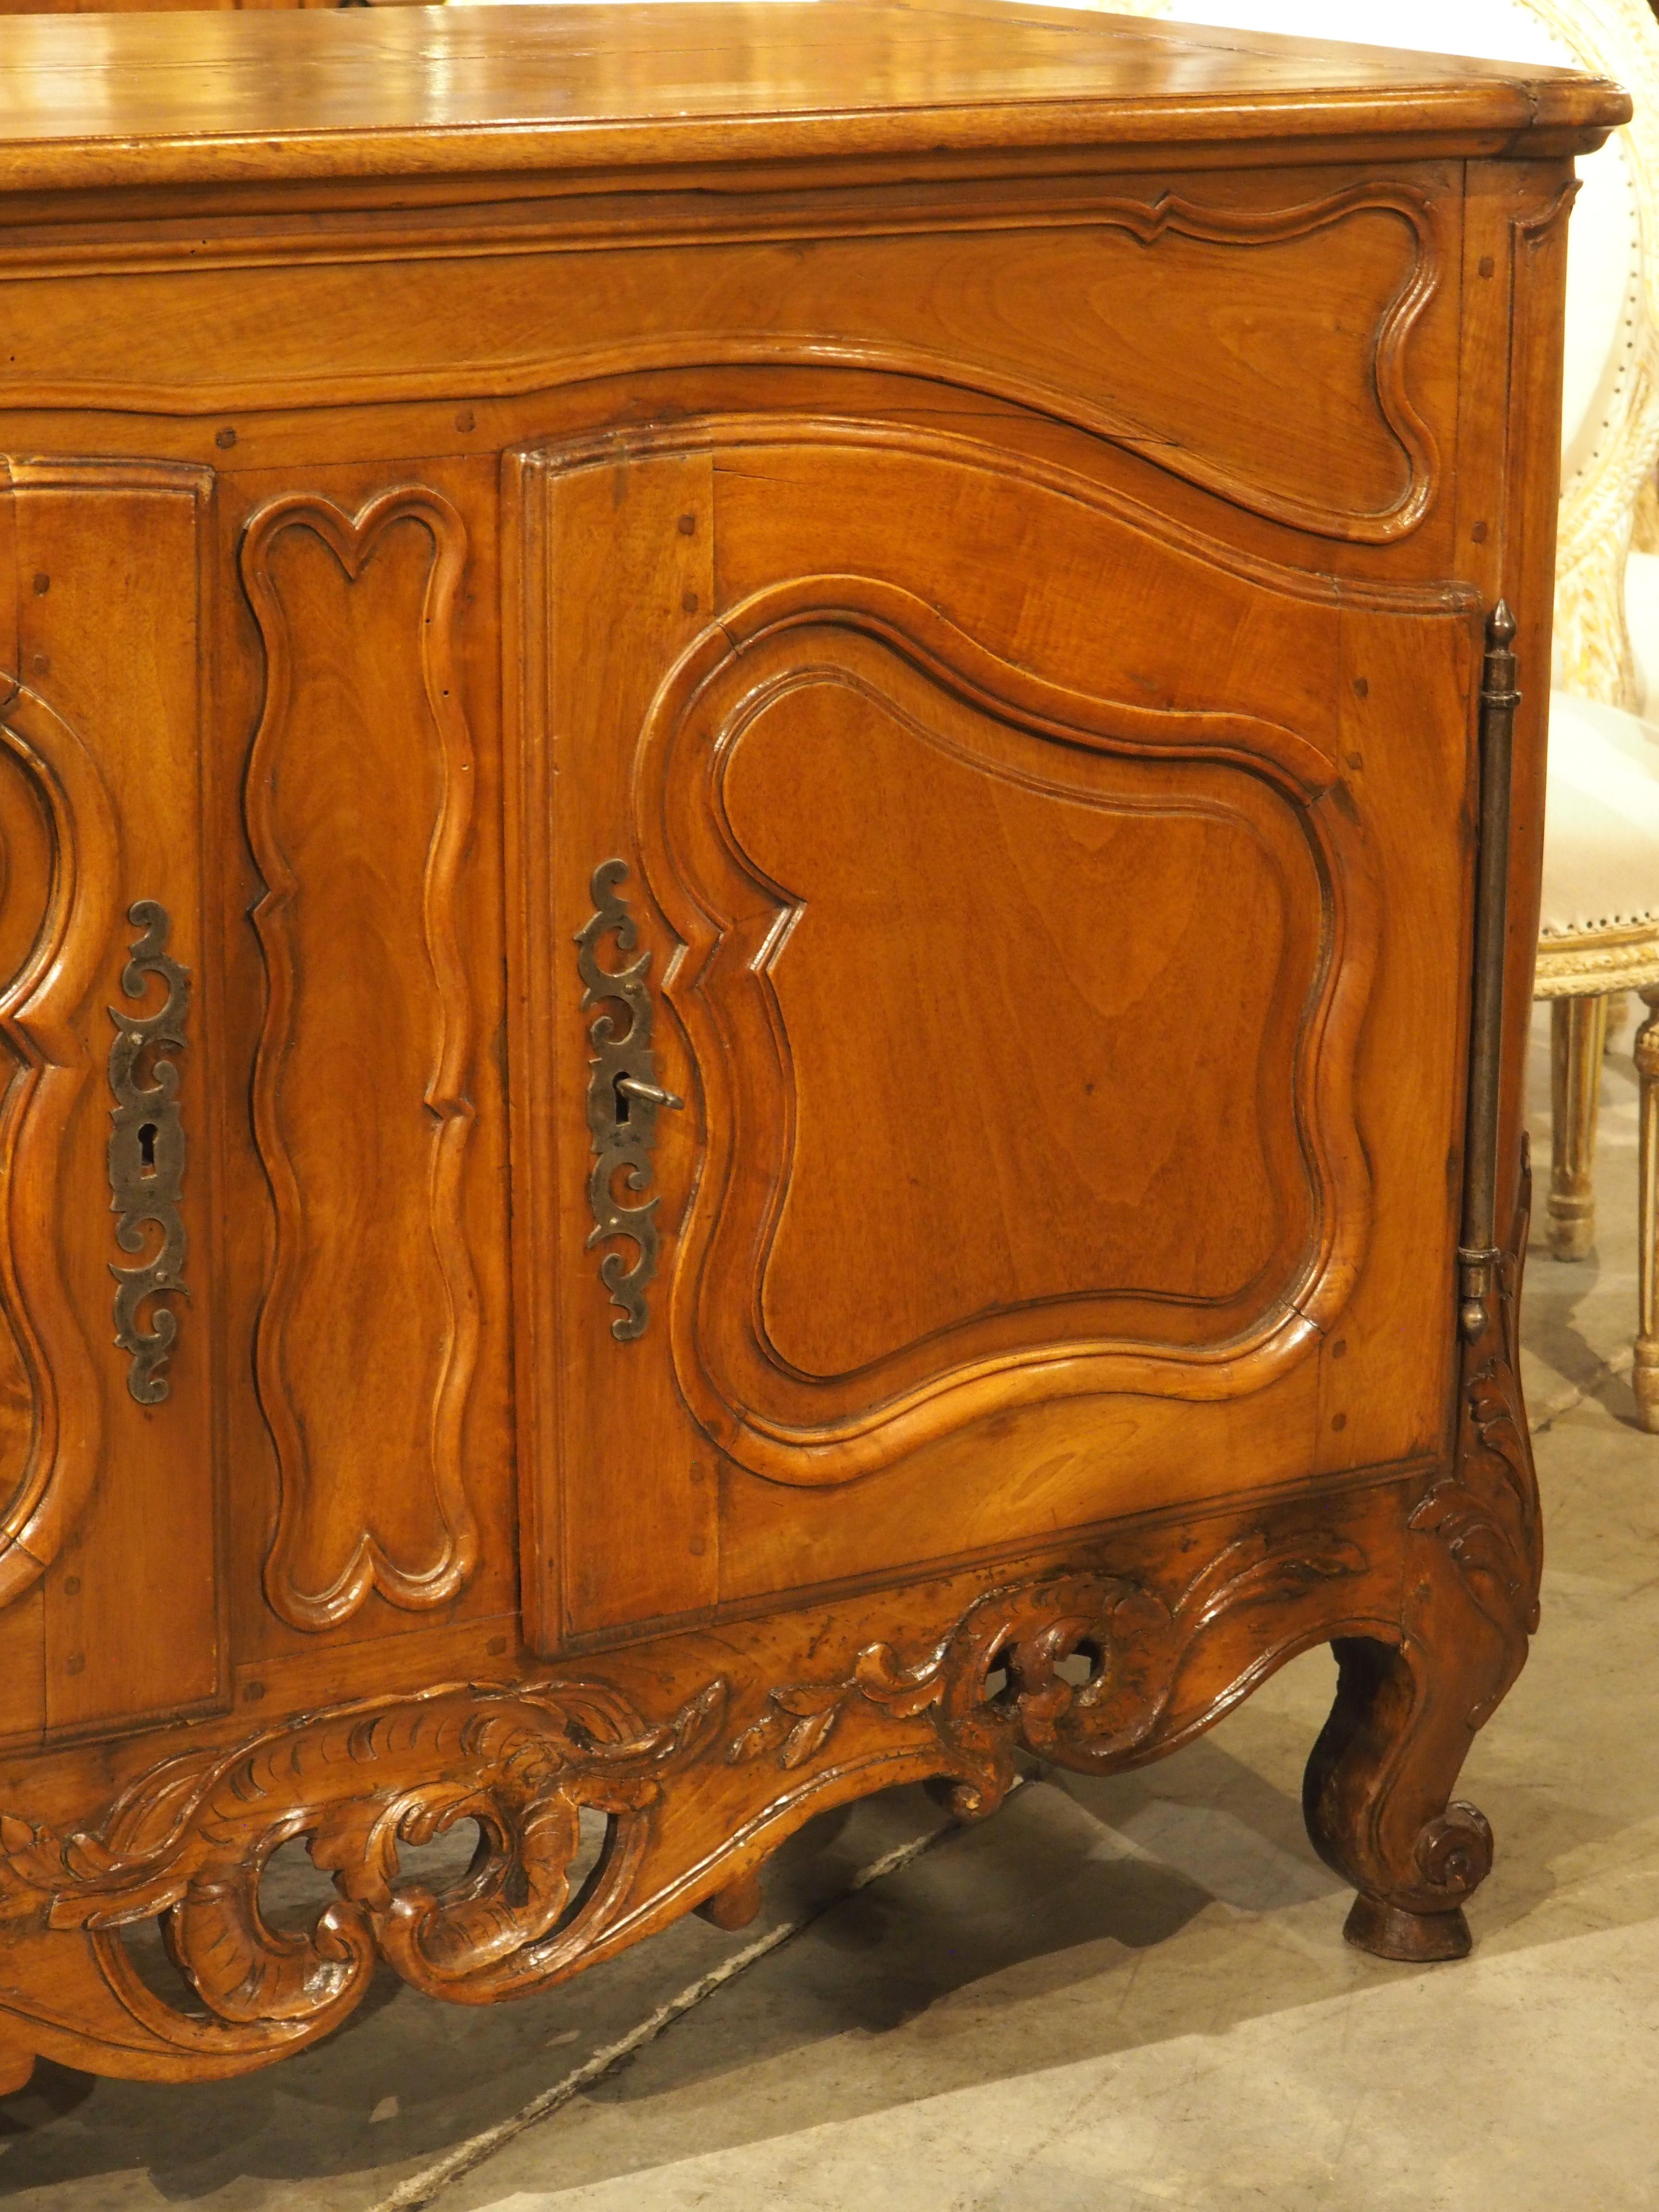 A stunning buffet from the period of Louis XV, this crédence (French for “credenza”) was hand-carved in walnut wood circa 1750 in Nimes, France. The deep carvings and moldings feature subtle asymmetry, which was a hallmark of the period.